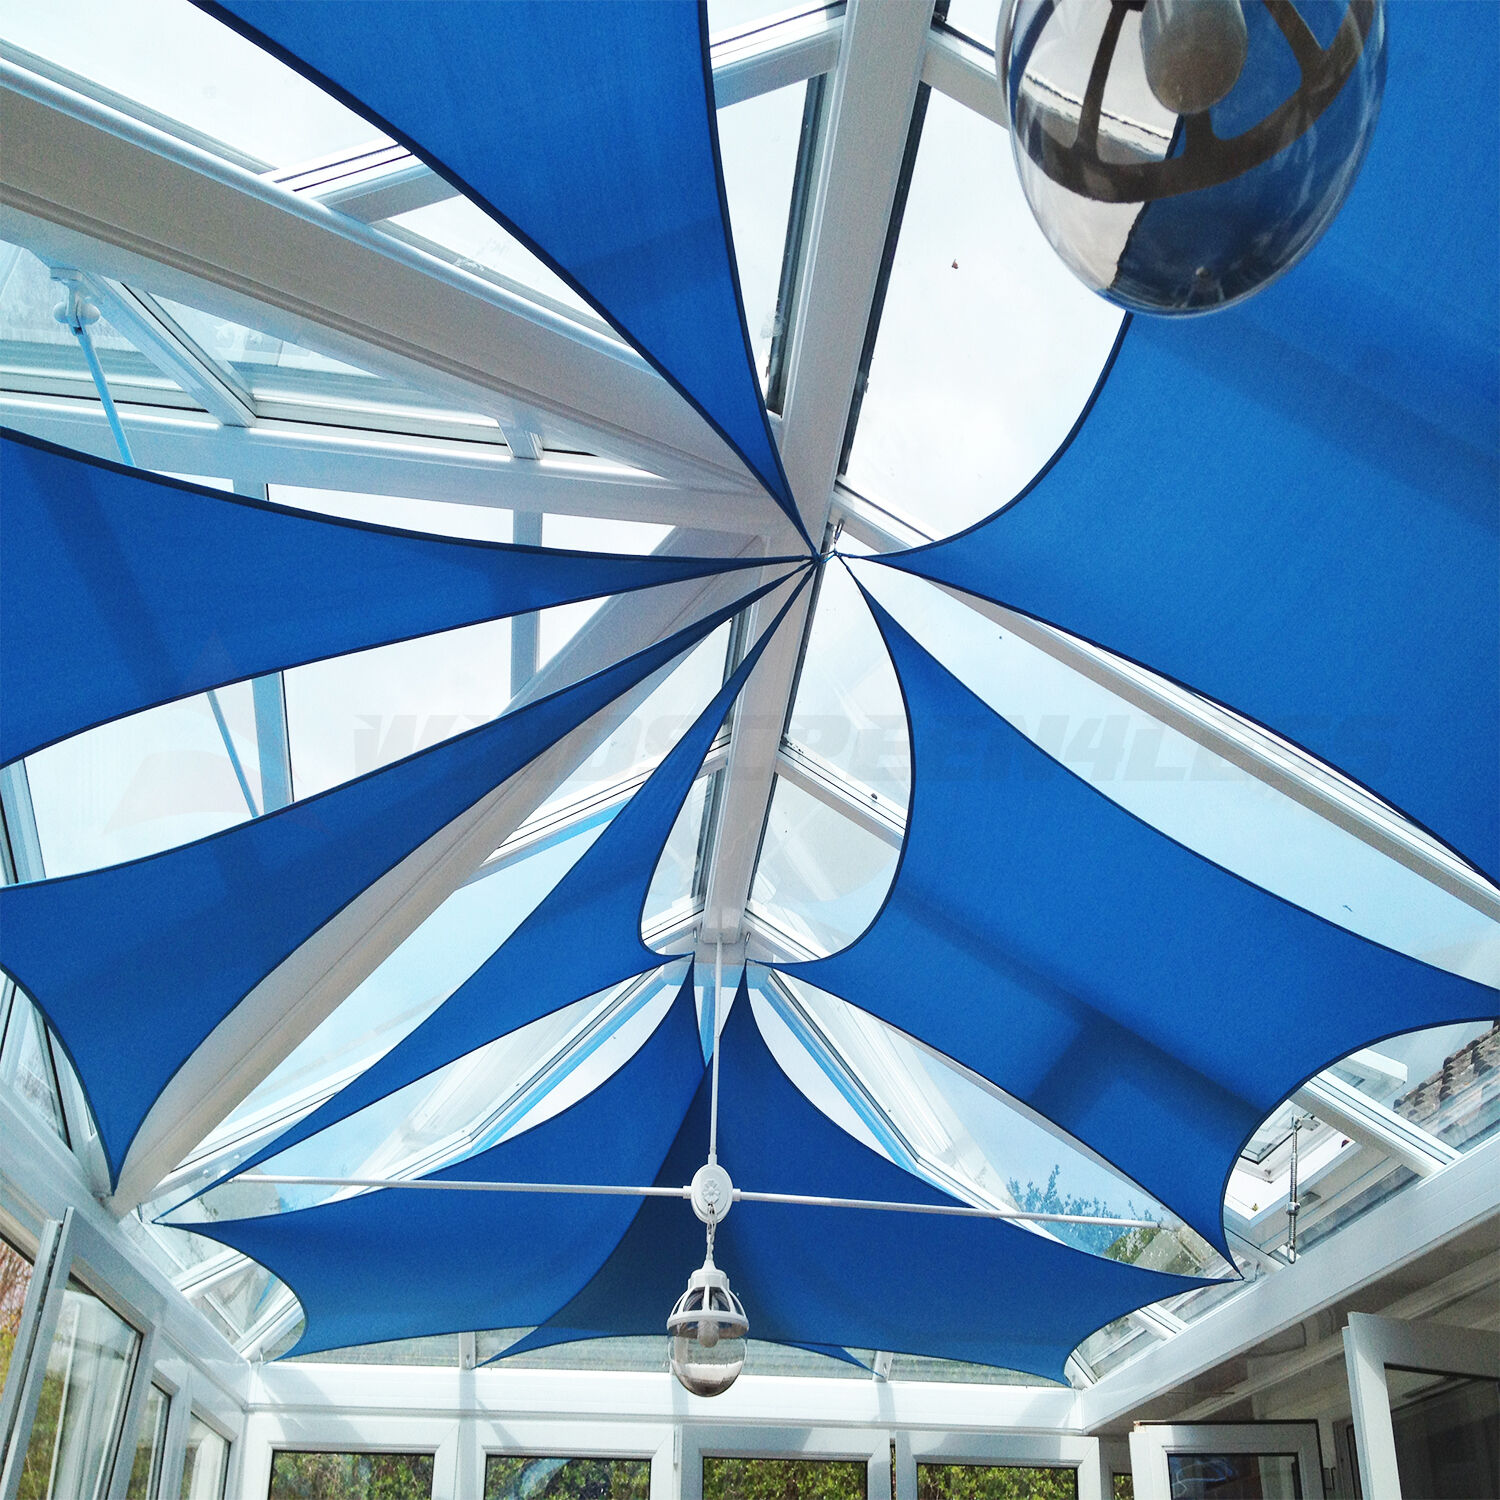 Square Sun Shade Sail Canopy Awning Patio Pool Cover Top Outdoor Uv Custom Size